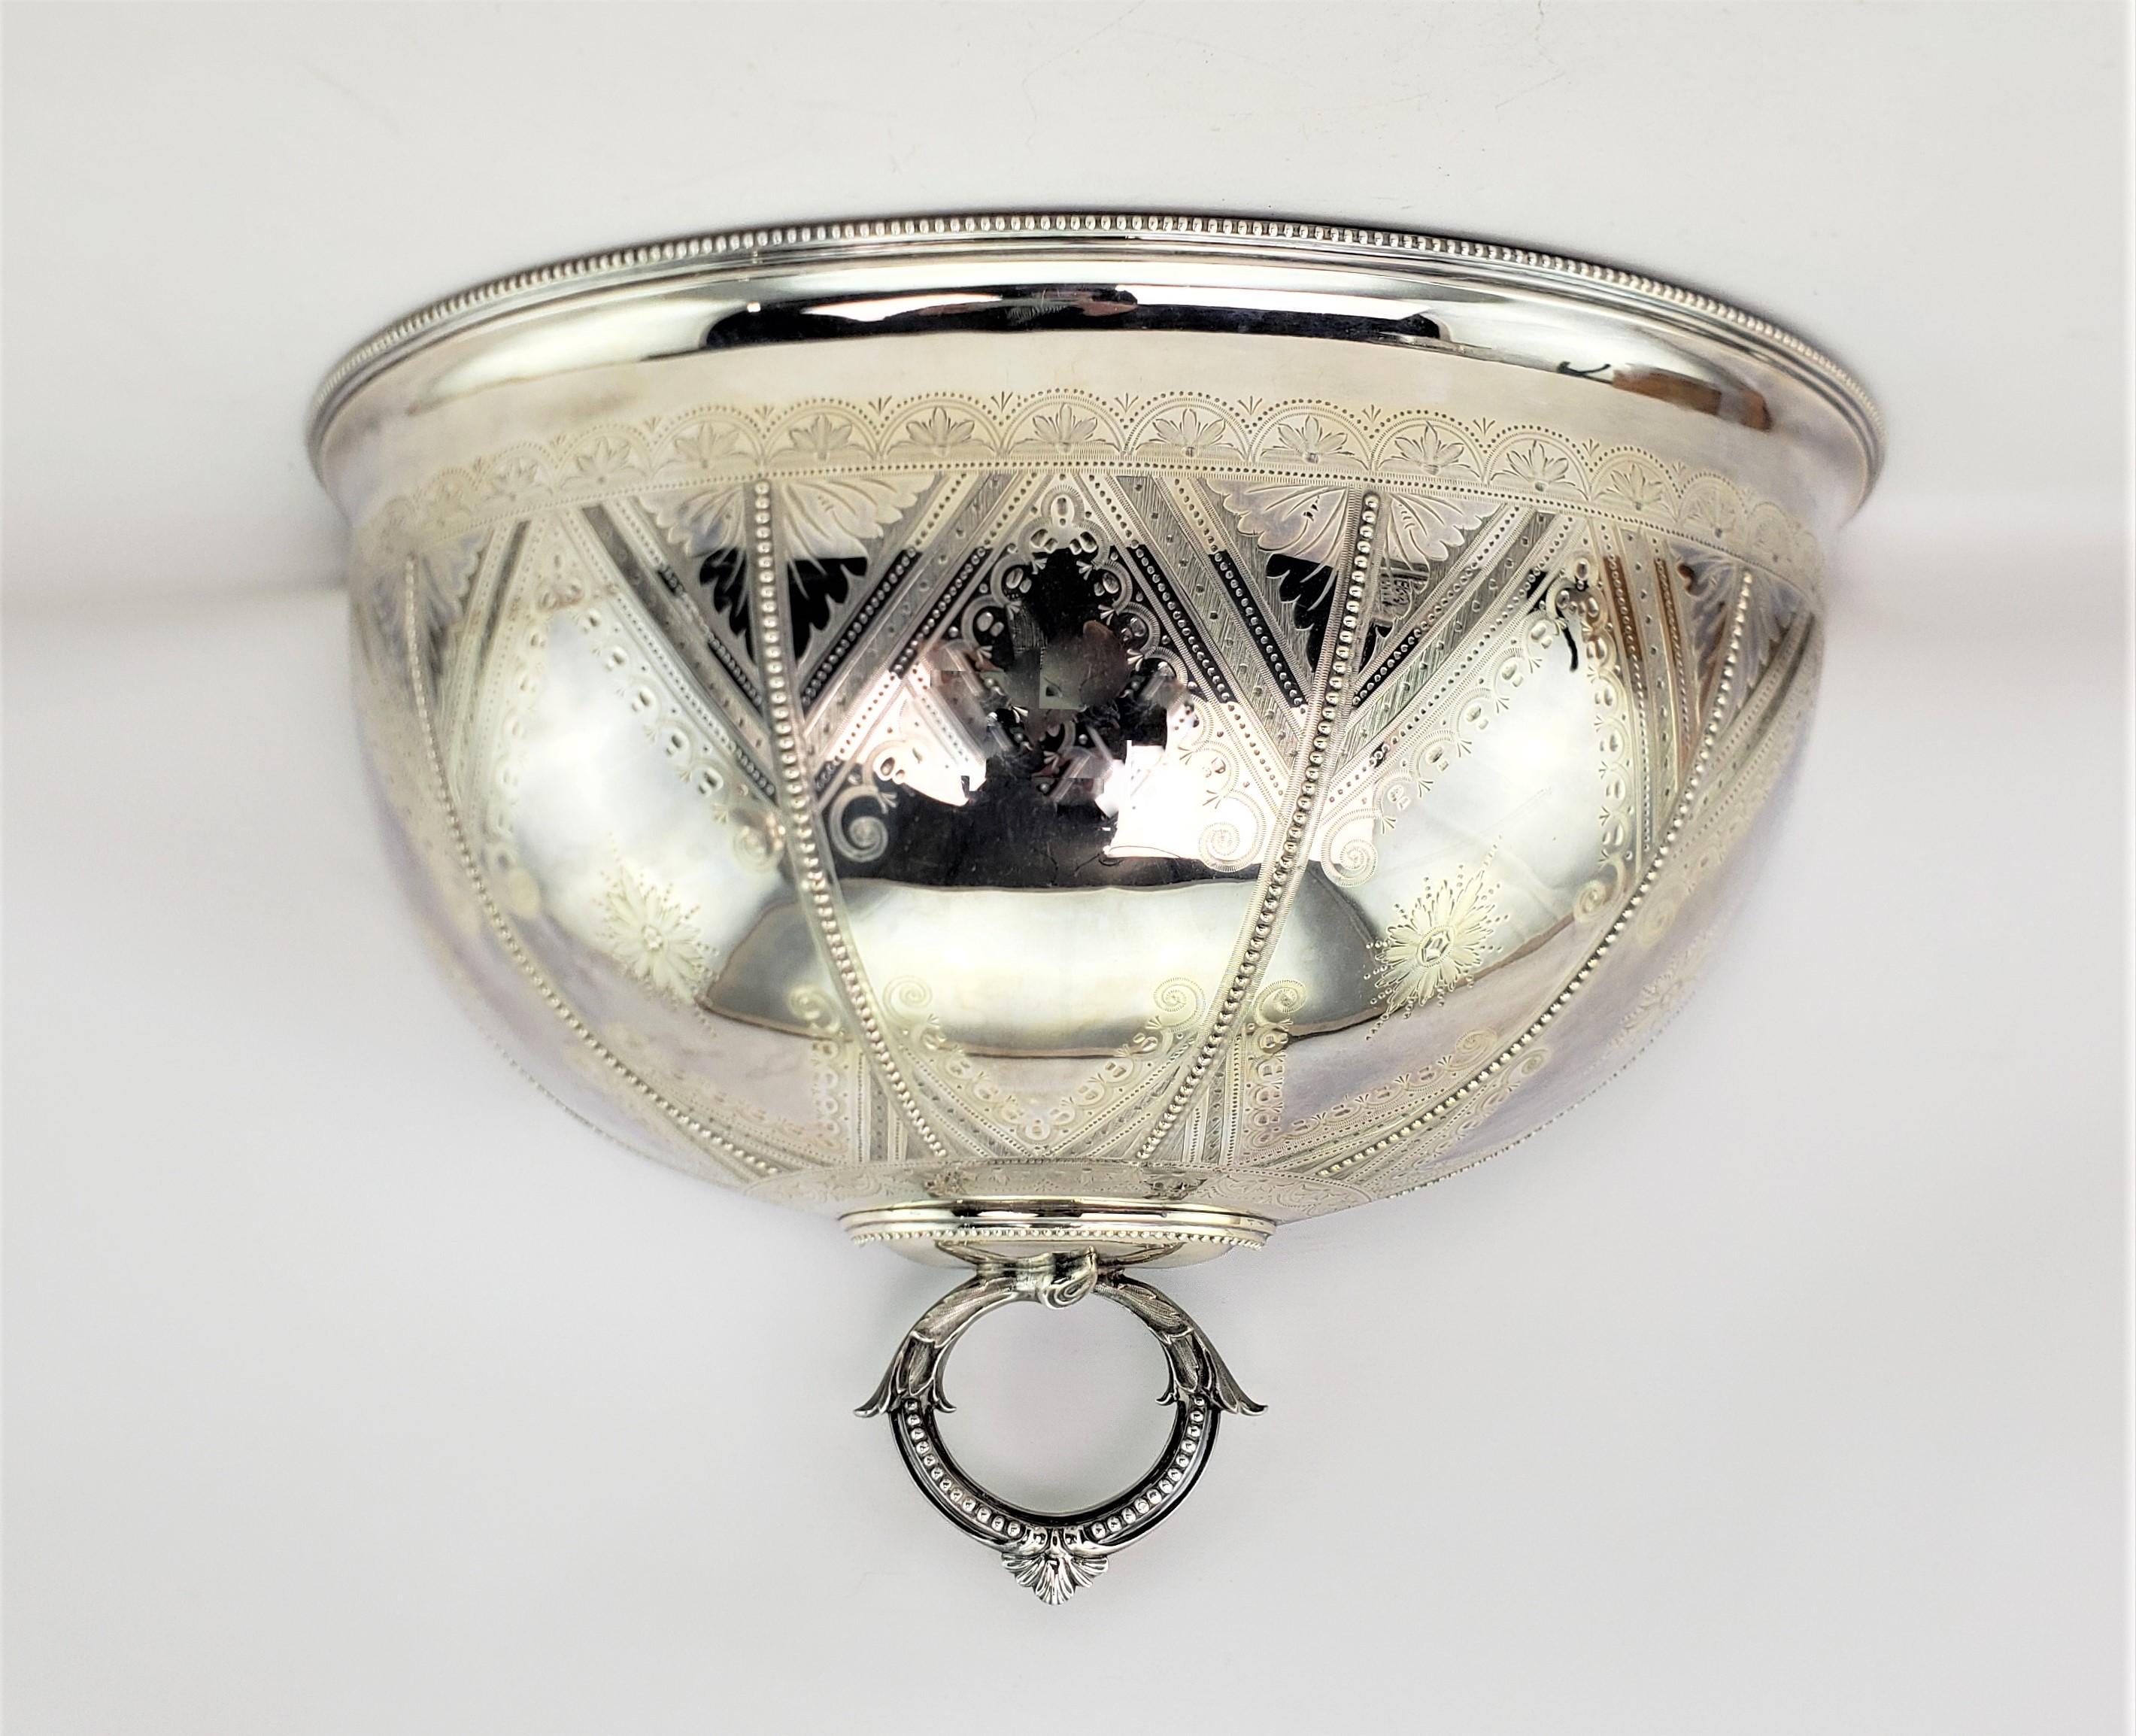 This converted antique meat dome is unsigned, but presumed to have originated from England and date to approximately 1880 and done in the period Victorian style. The half meat dome is composed of silver plate and is ornately engraved with a diamond